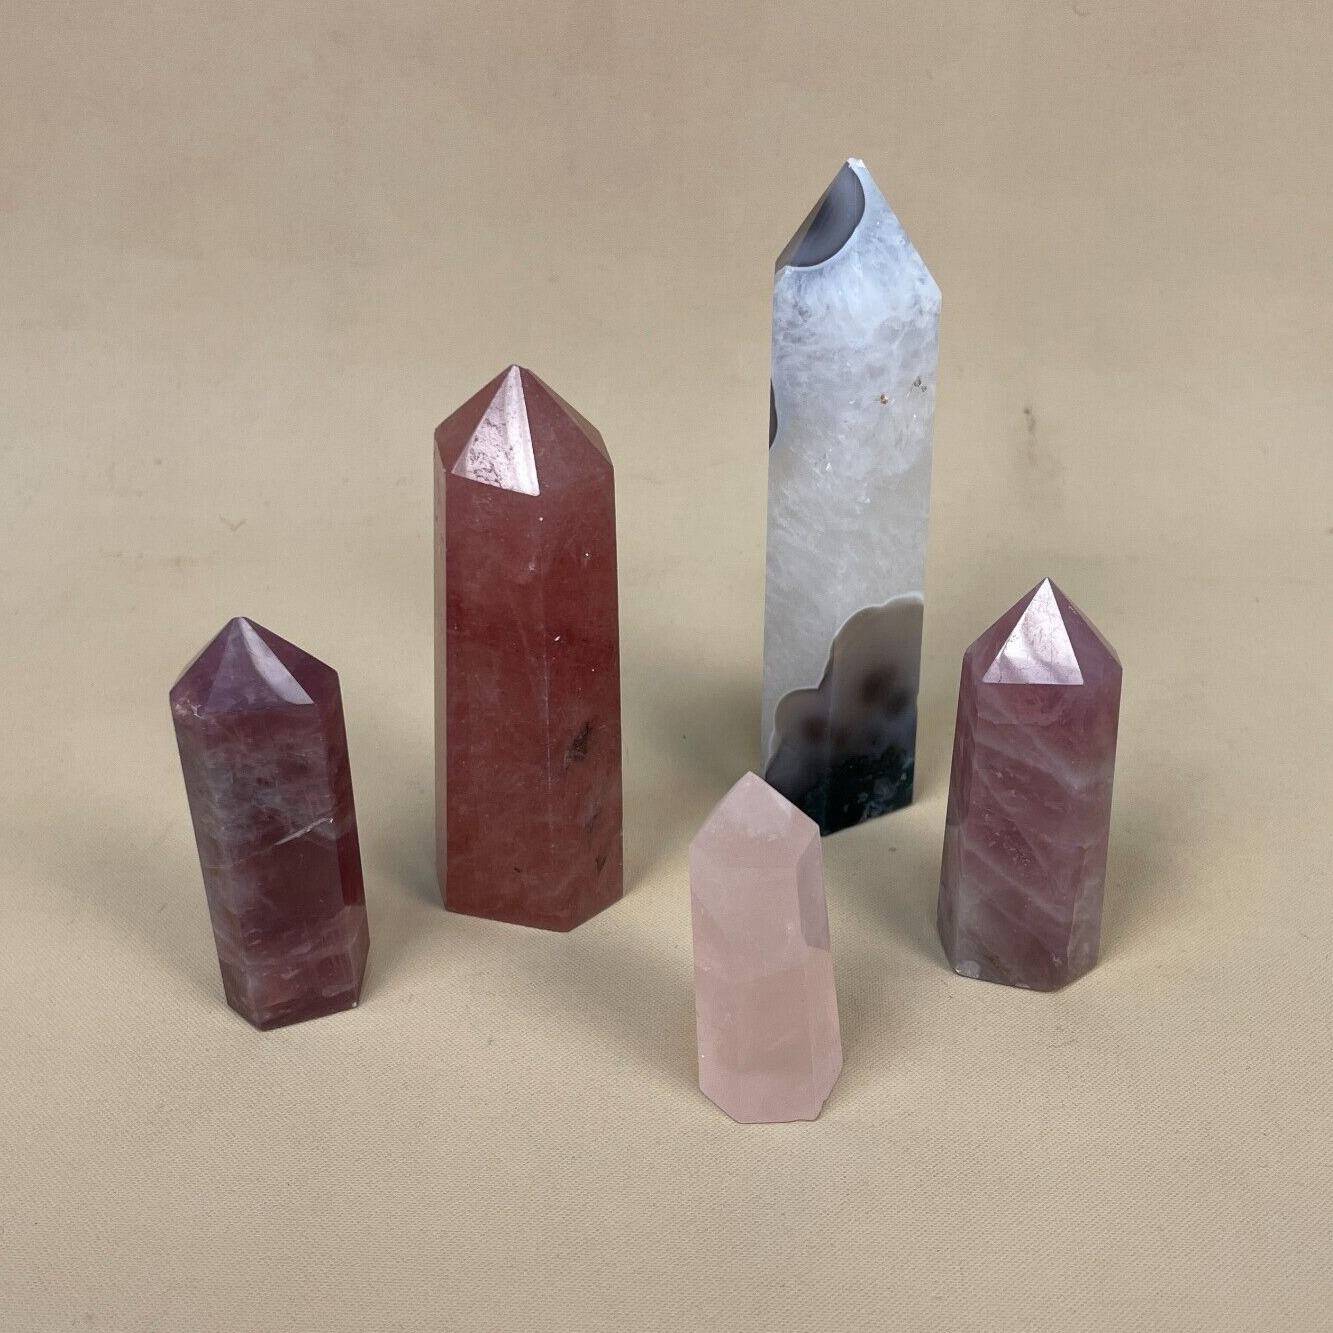 5 Pieces of Natural Quarts Crystal Stone Towers Pink White Polished Gemstone